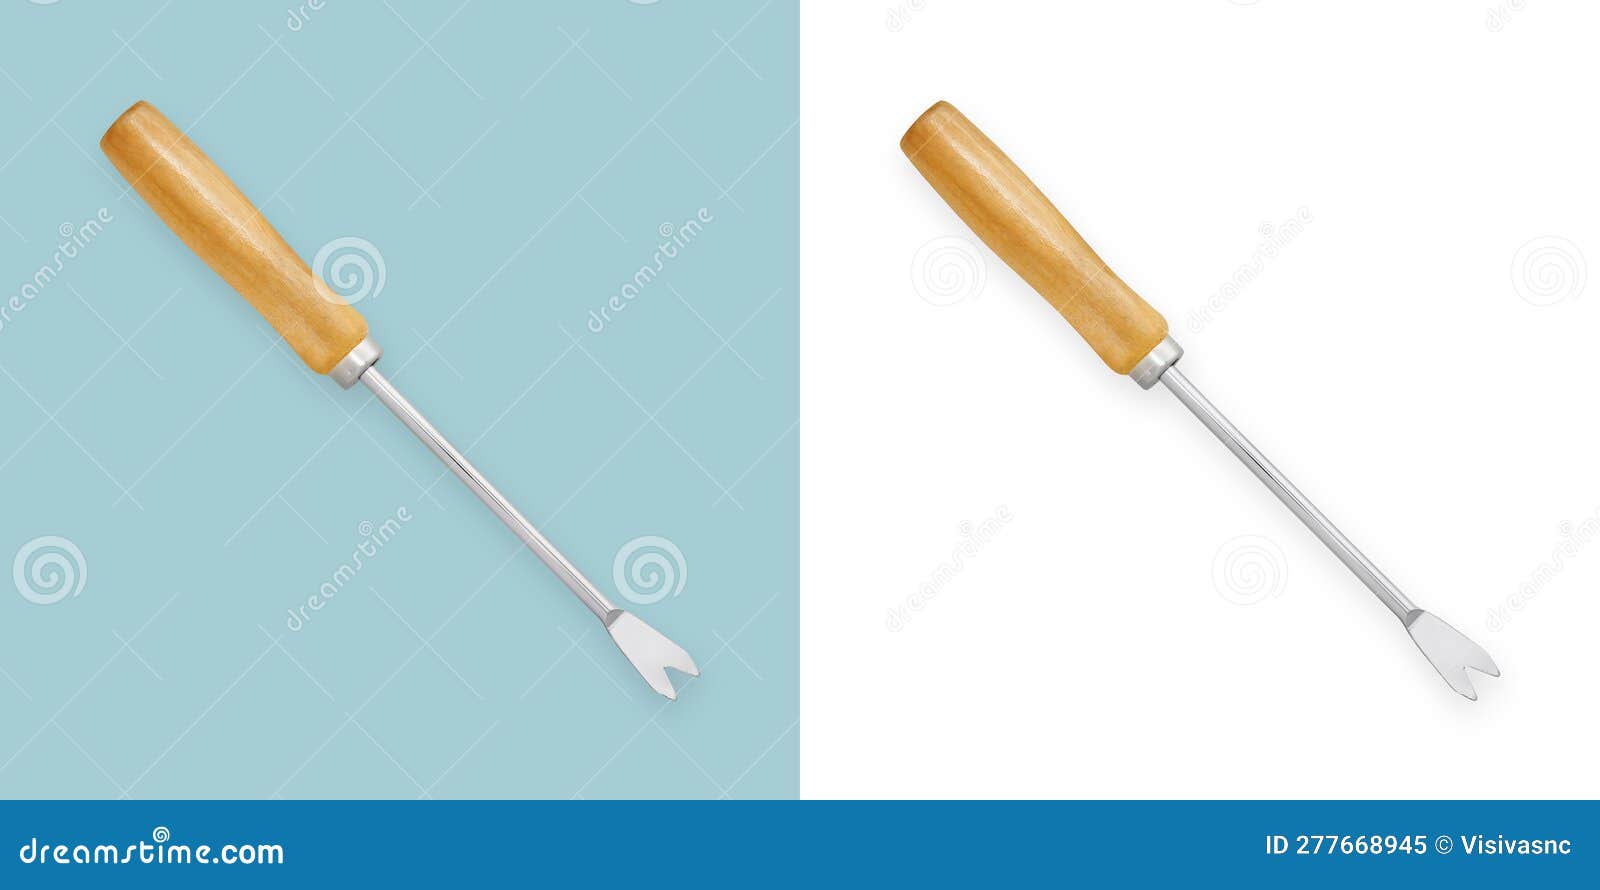 Garden Weed Removal Hand Tool with Wooden Handle. Top View Isolated on  White Background Stock Illustration - Illustration of online, sale:  277668945